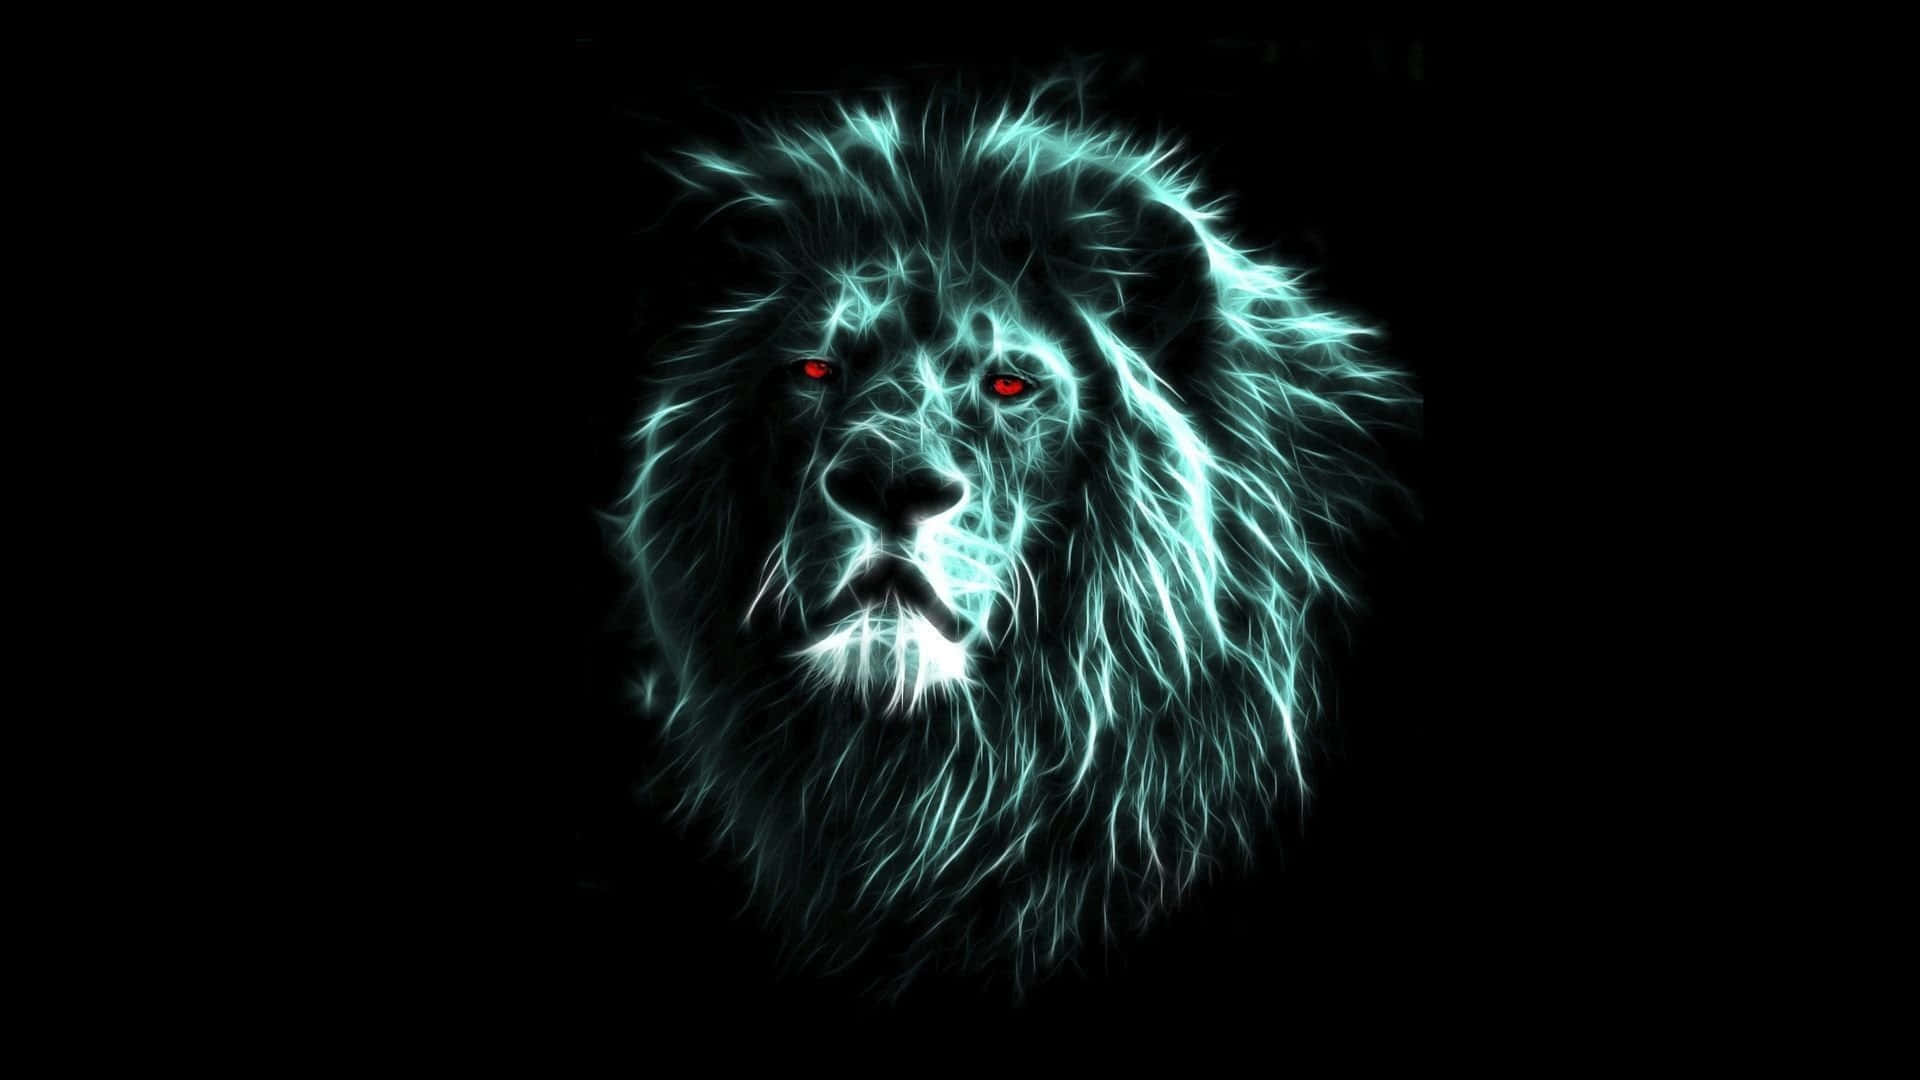 Brightly Colored Abstract Lion Painting Illuminating Joy Wallpaper